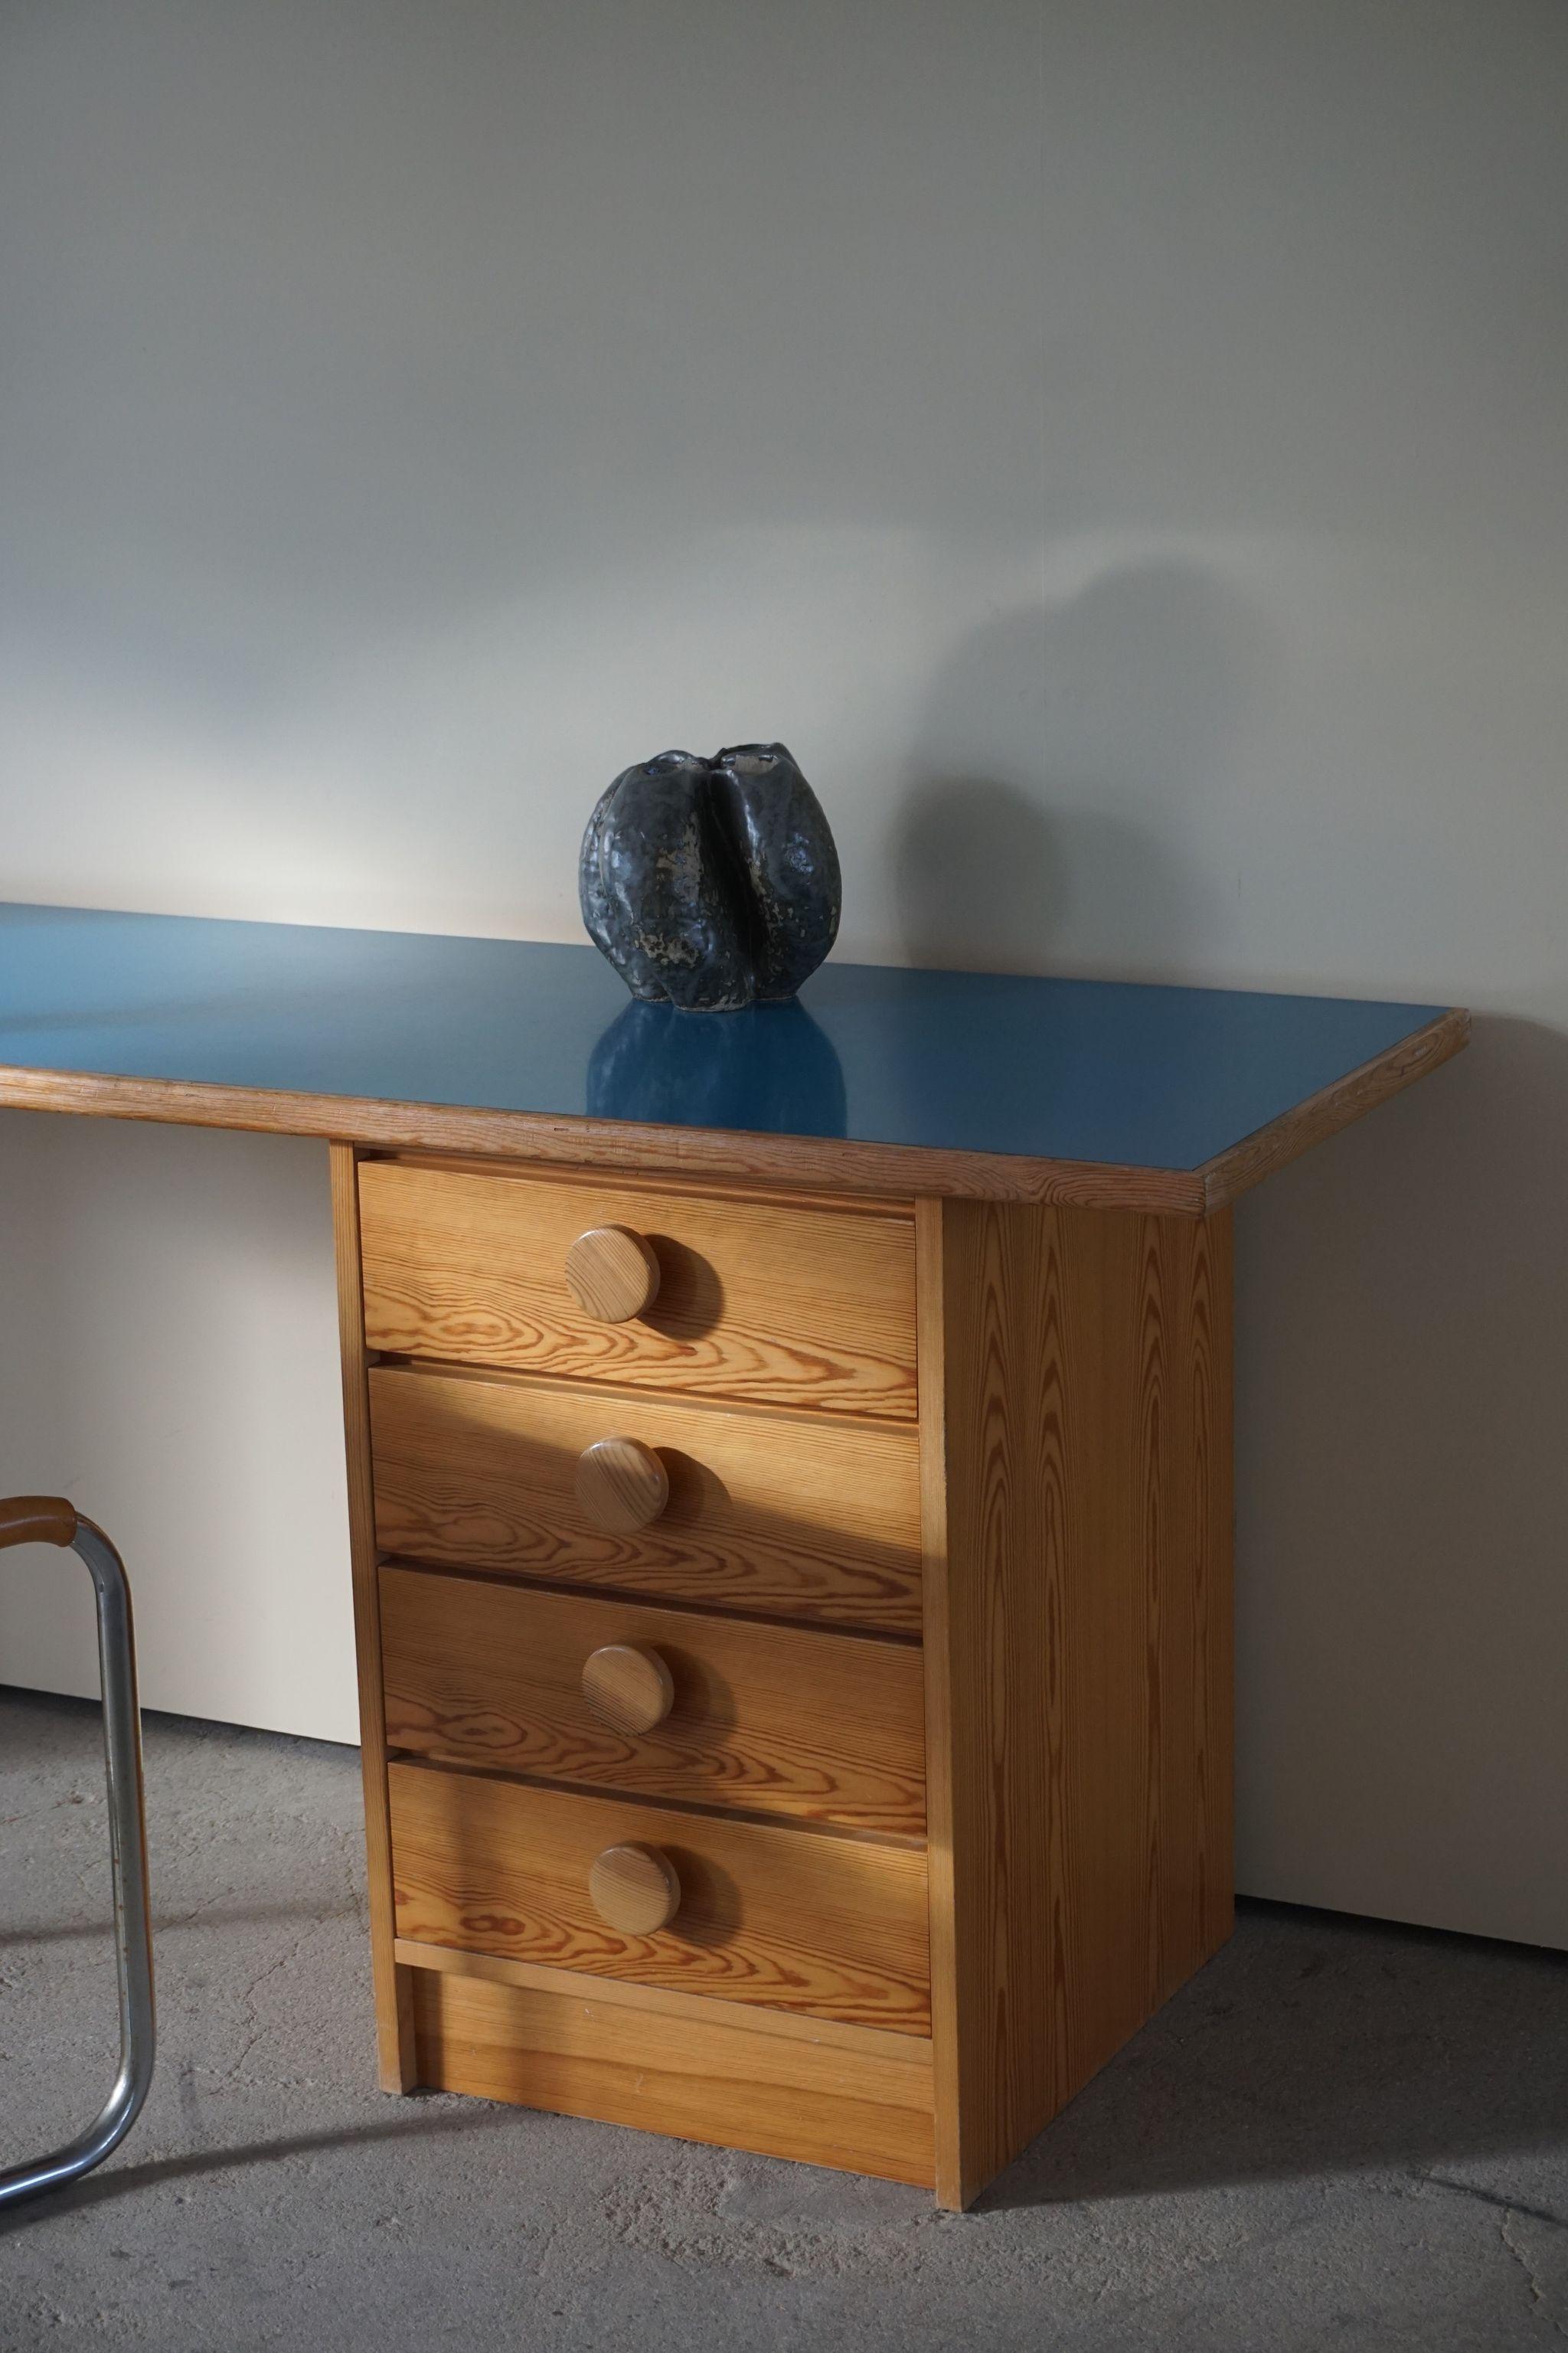 Danish modern desk in pine and blue Formica, 1970s. 
The desk can also be used as a freestanding desk.